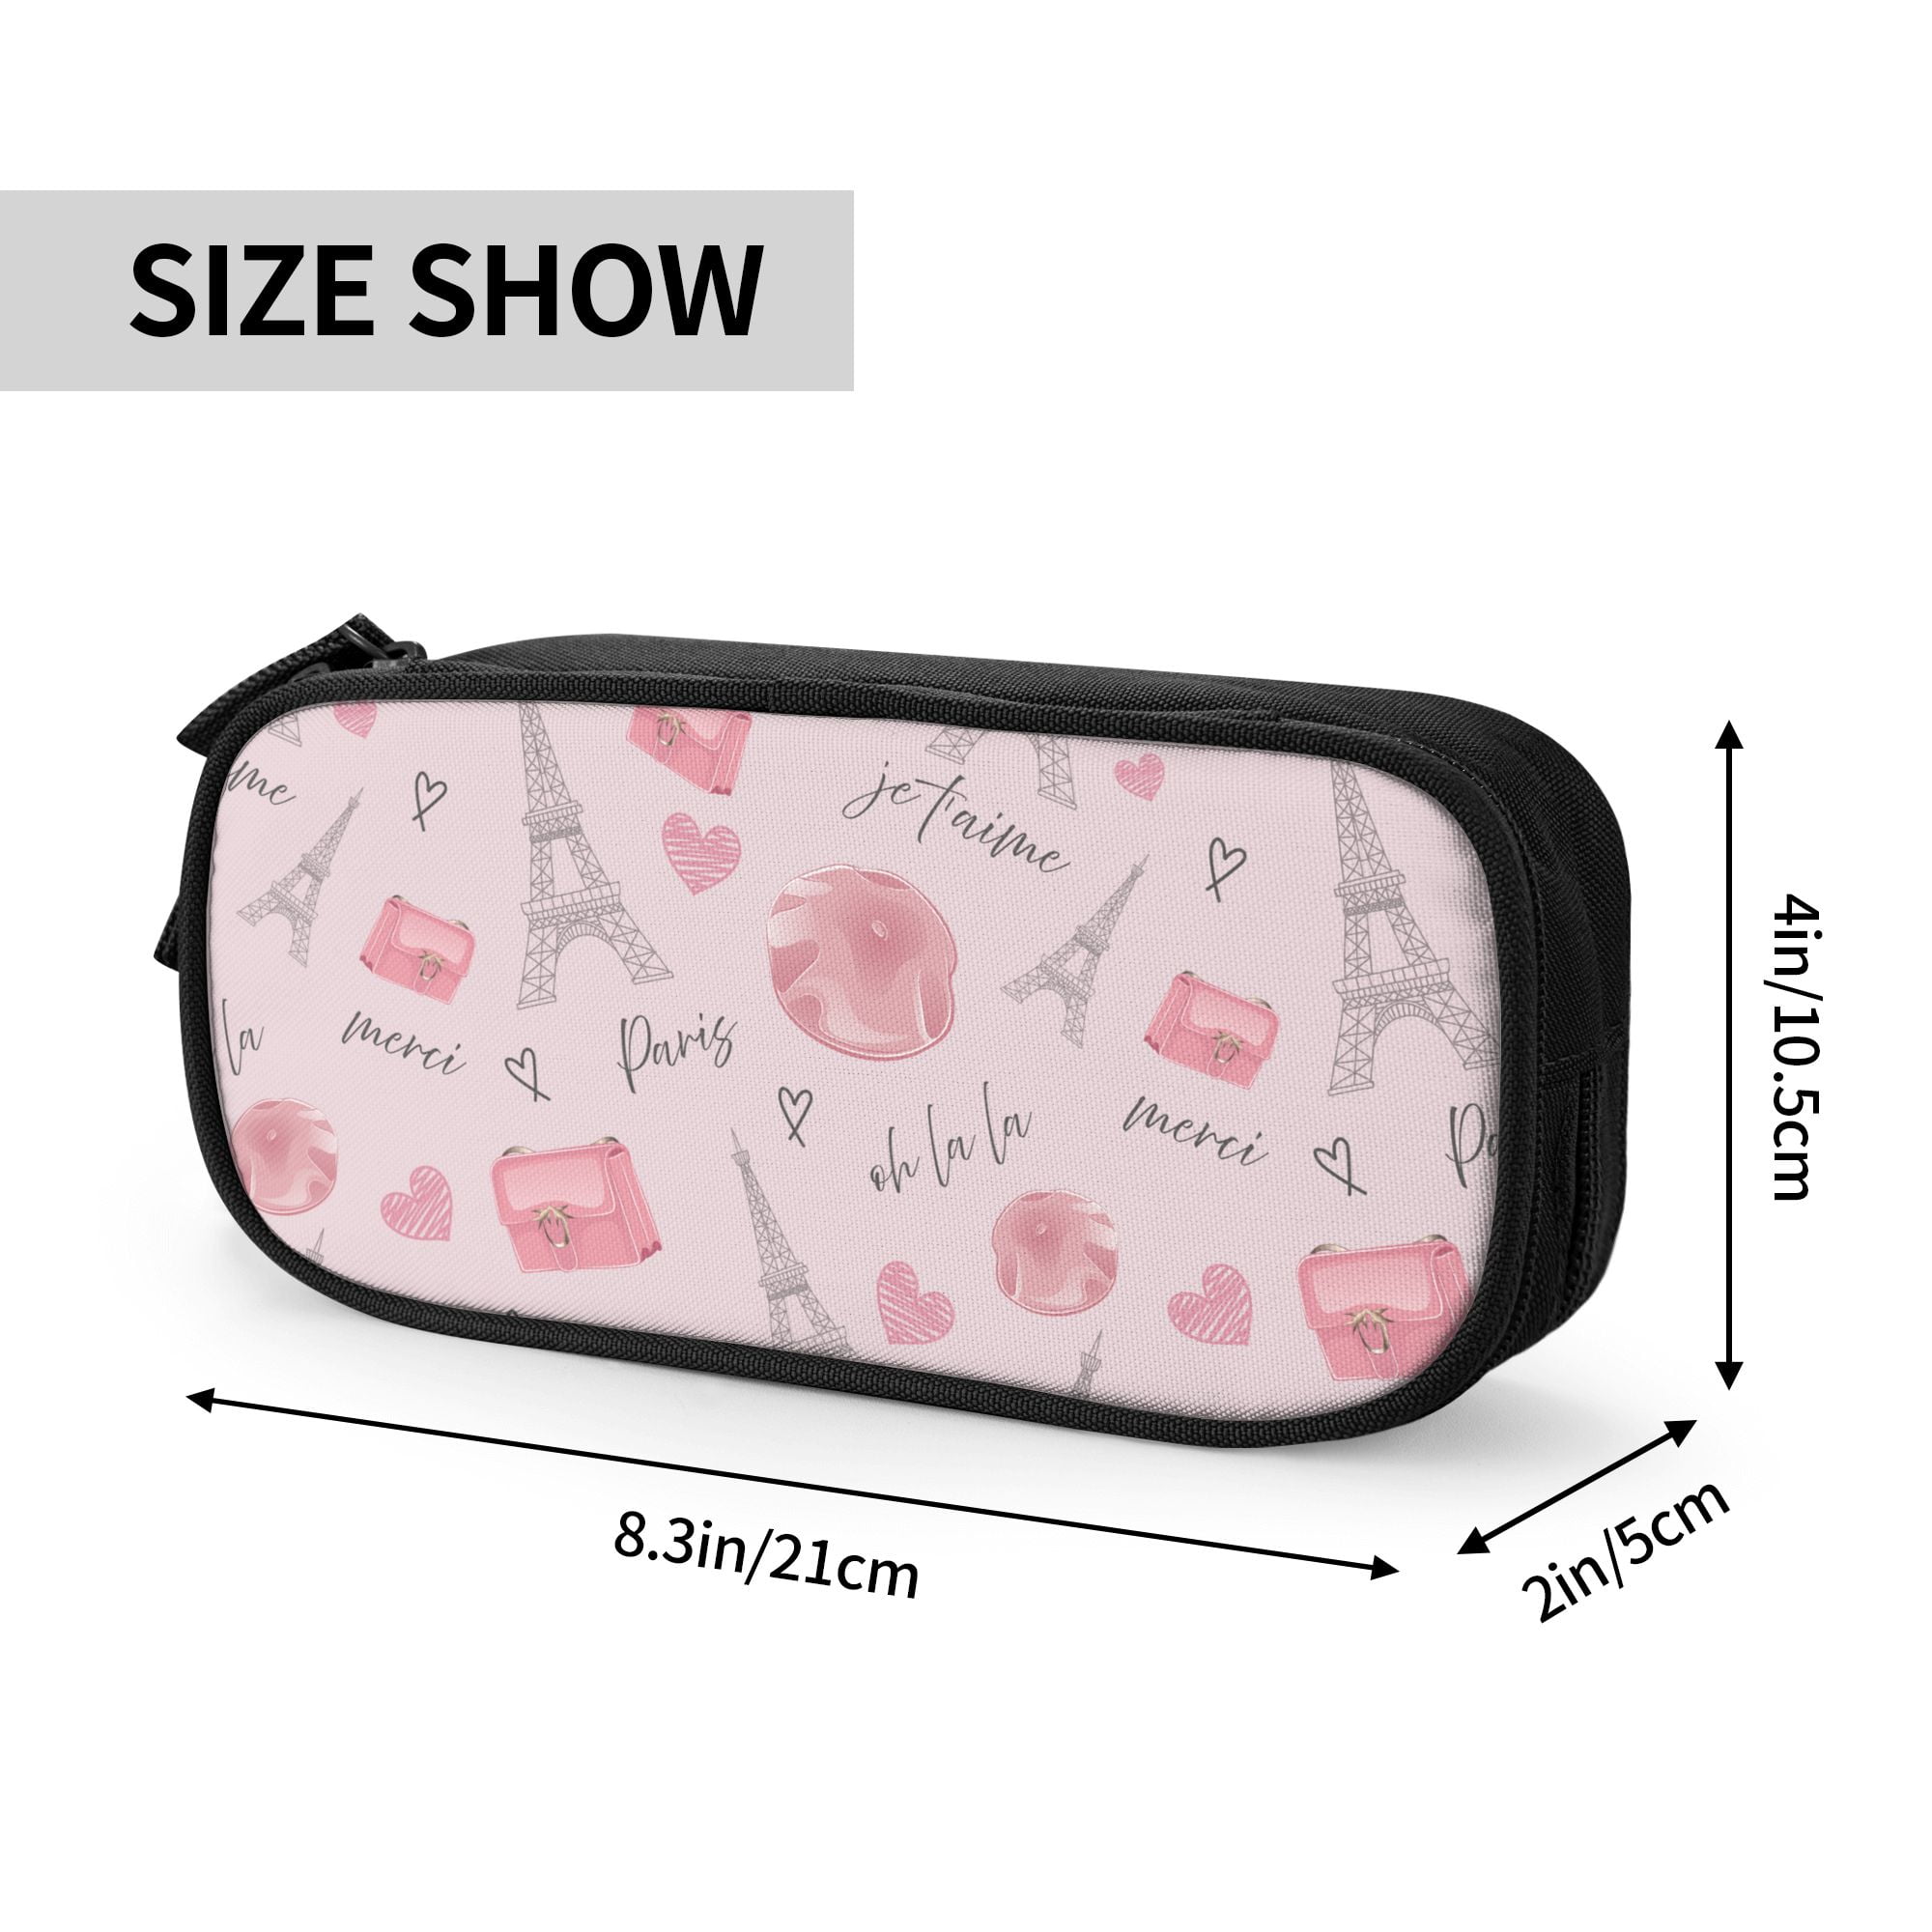 NORDICSNOTION Pink Pencil Case for Girls Big Capacity Pink Pouch Cool Stuff  for Girls Water Proof Cute Stuff and asthetic Stationary on OnBuy